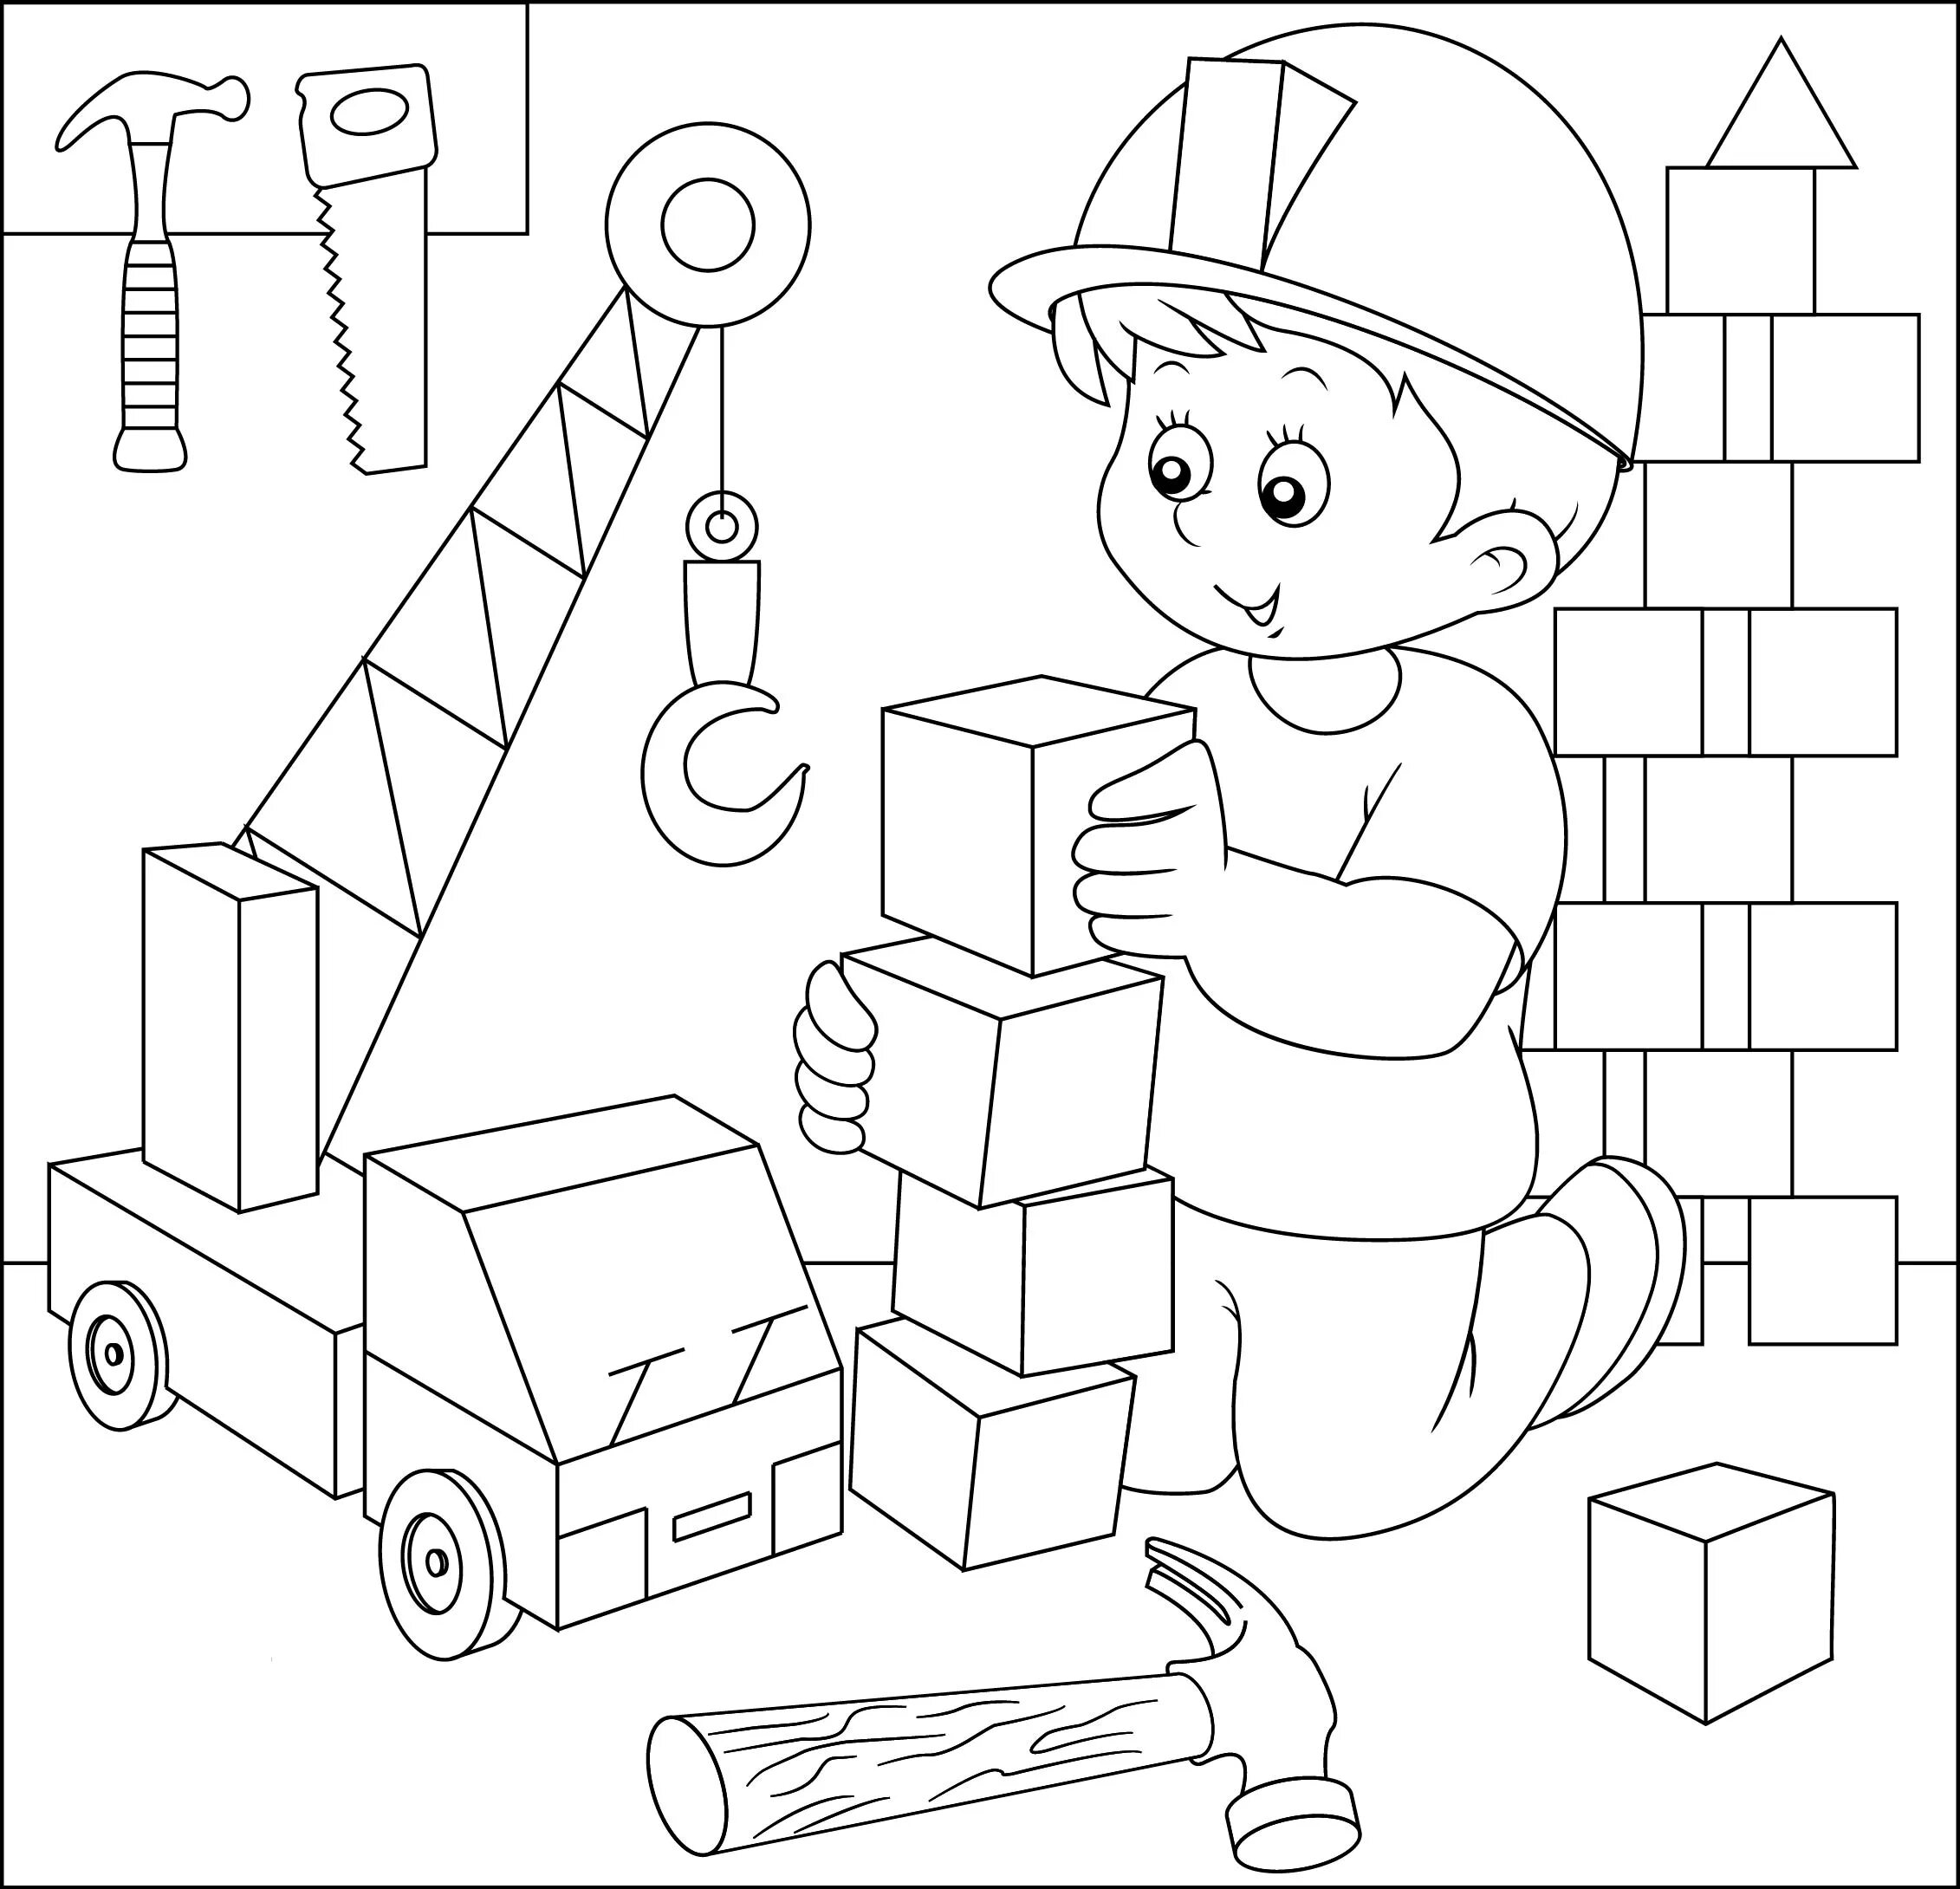 Occupational safety through the eyes of children for preschoolers #4